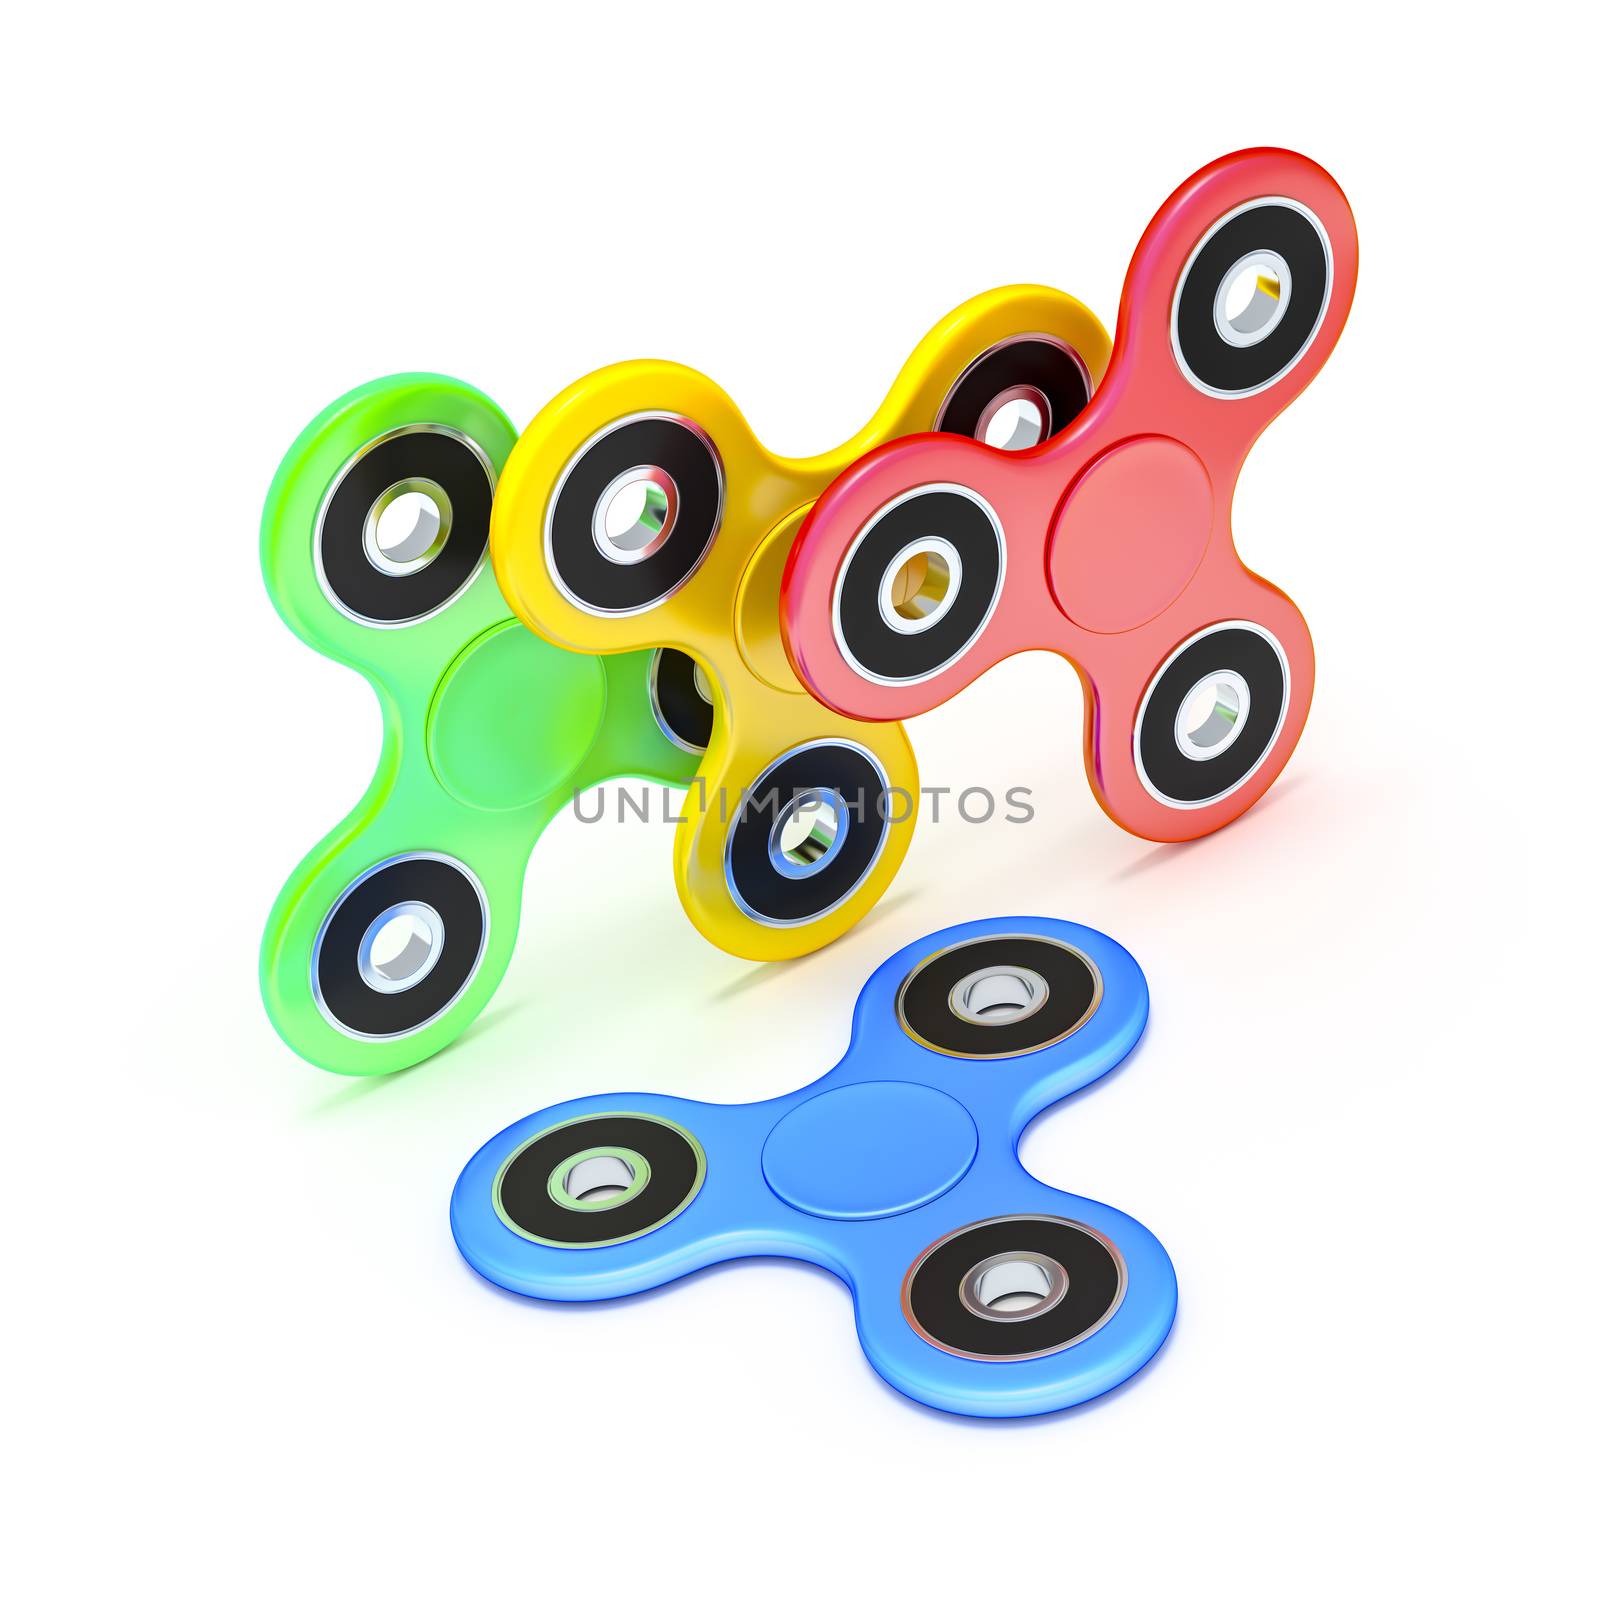 3d rendering of four fidget spinner in different colors